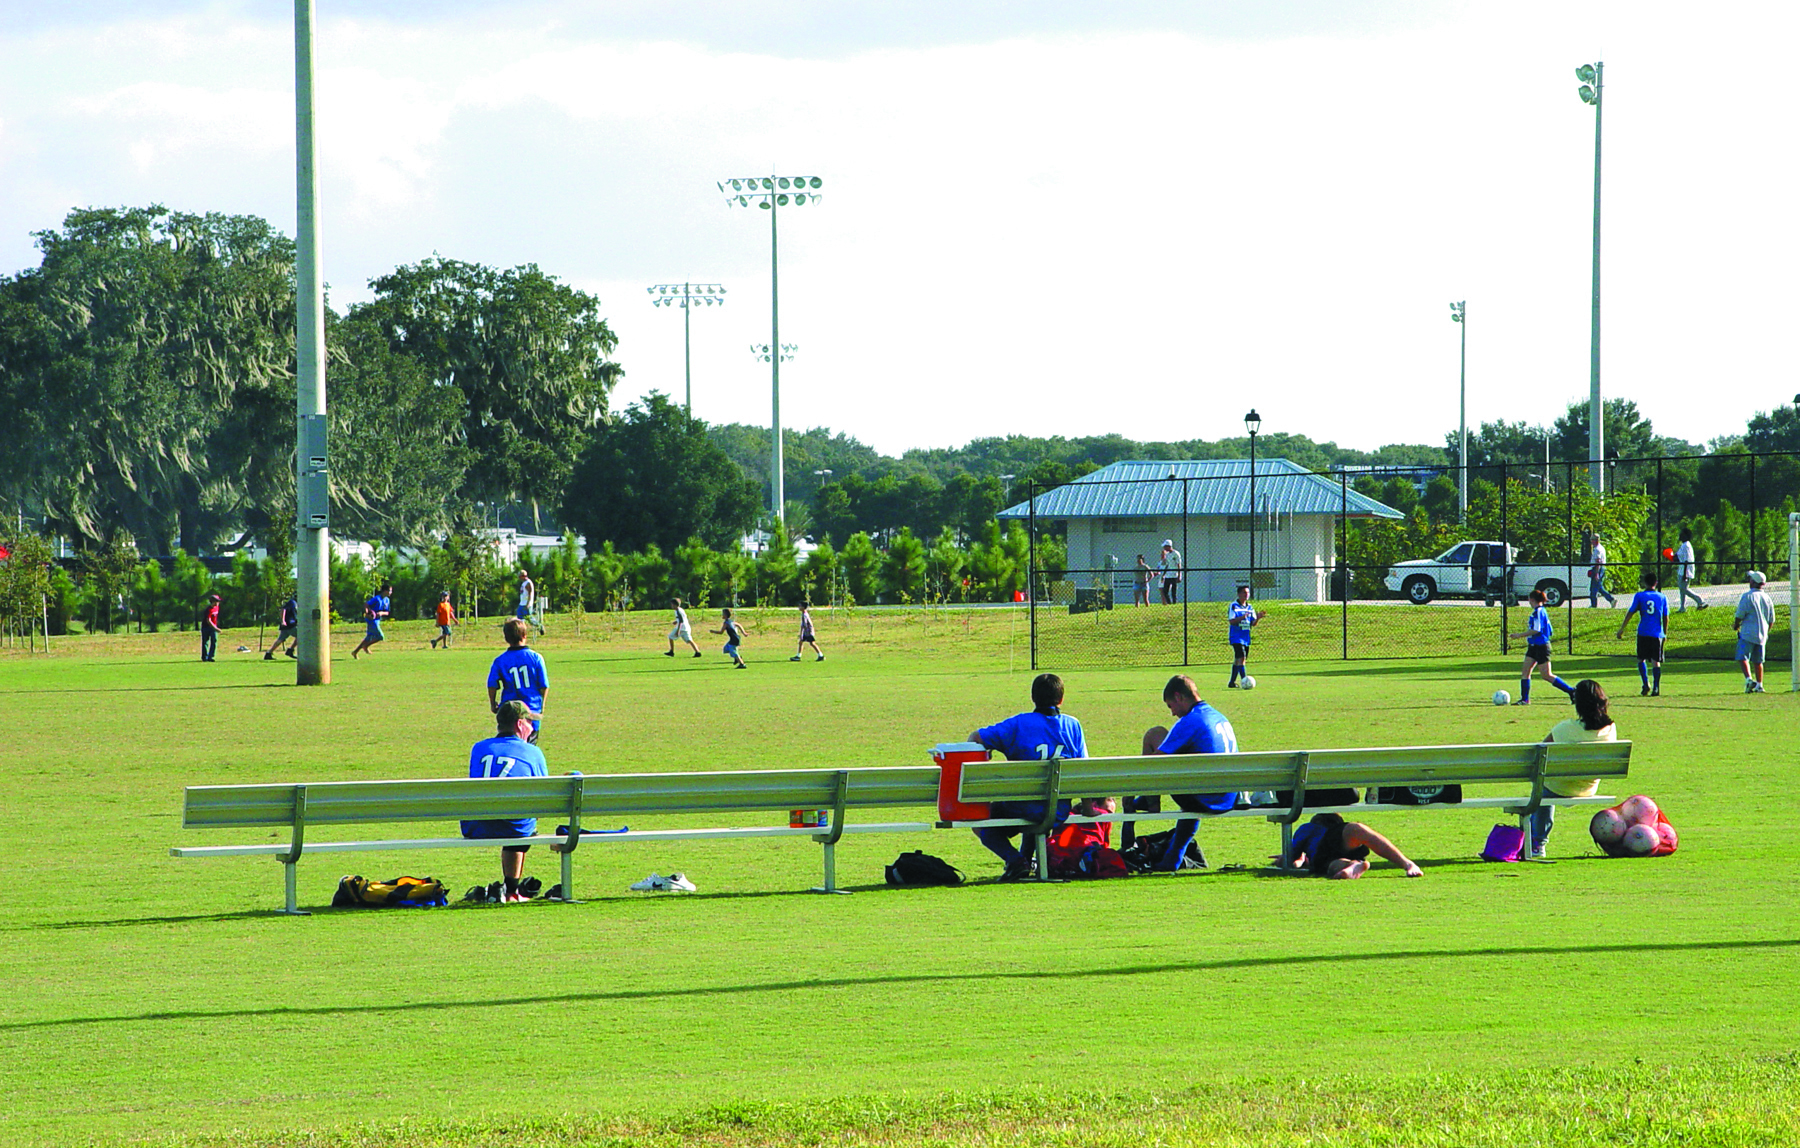 Soccer players watch the game at Lake Bonny Park